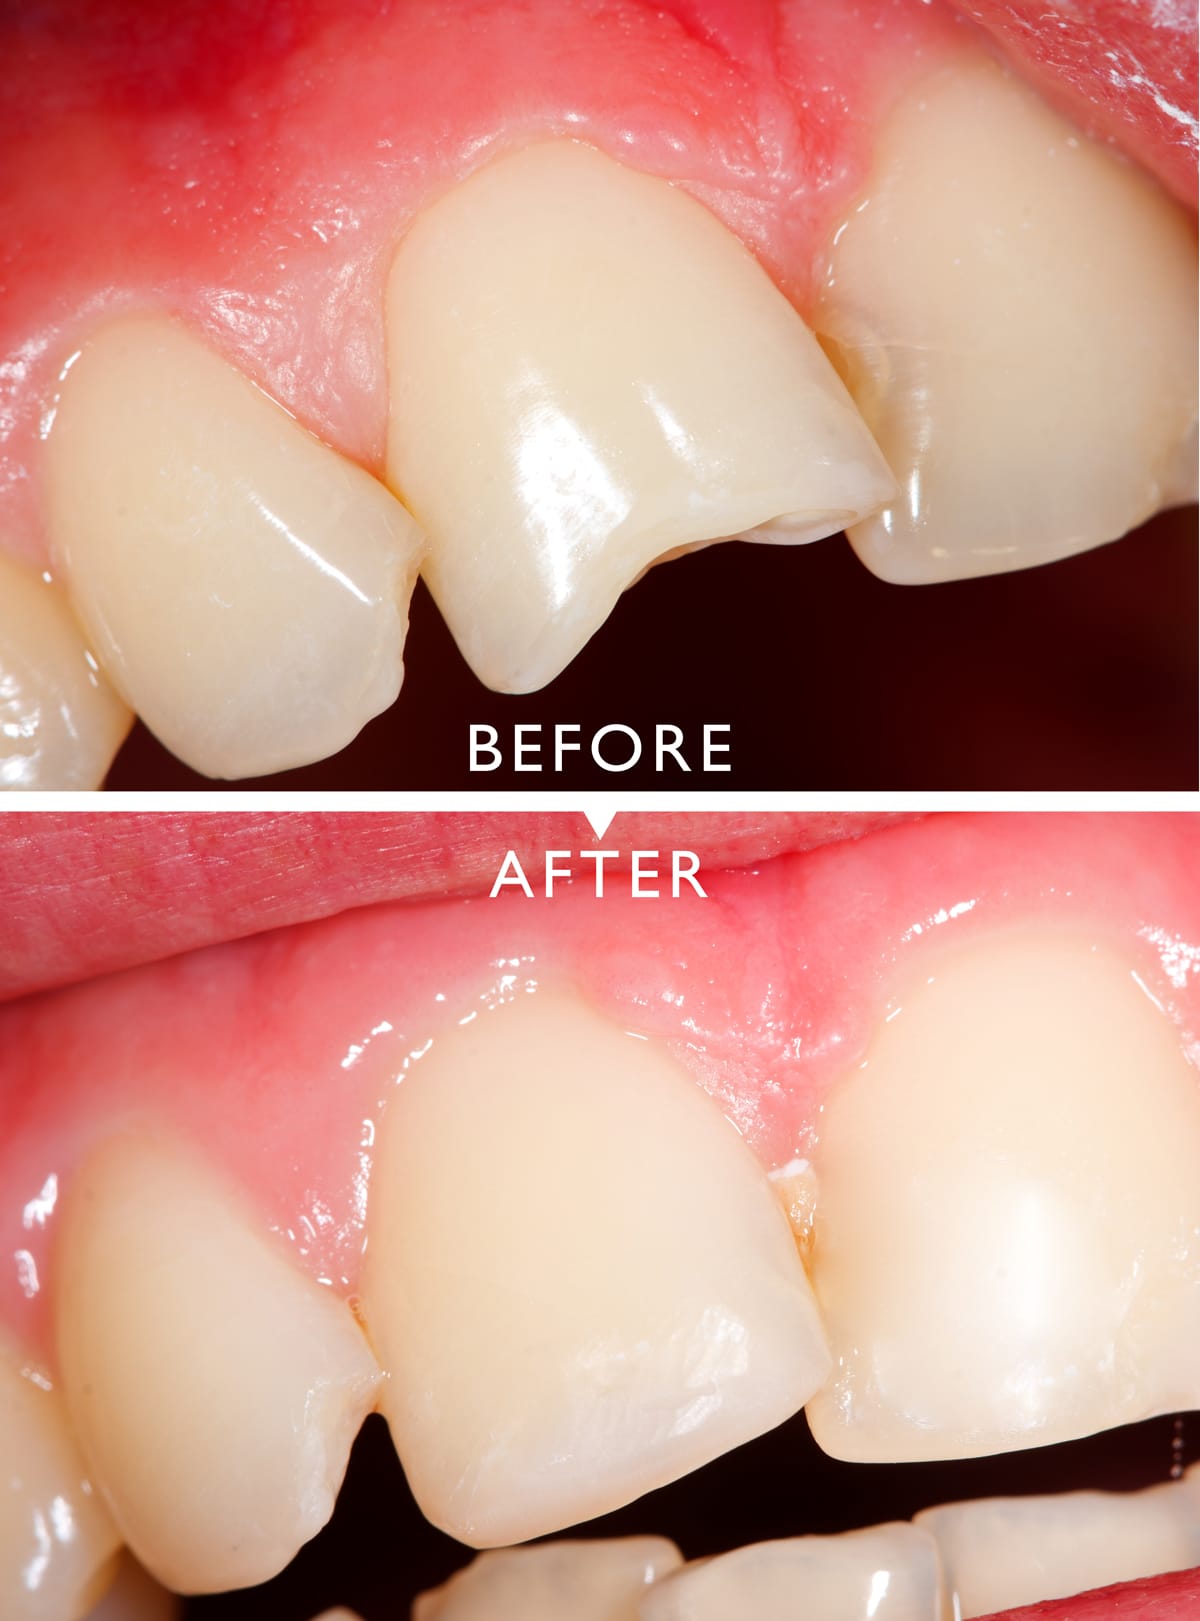 How to Prepare and Repair a Chipped or Broken Tooth